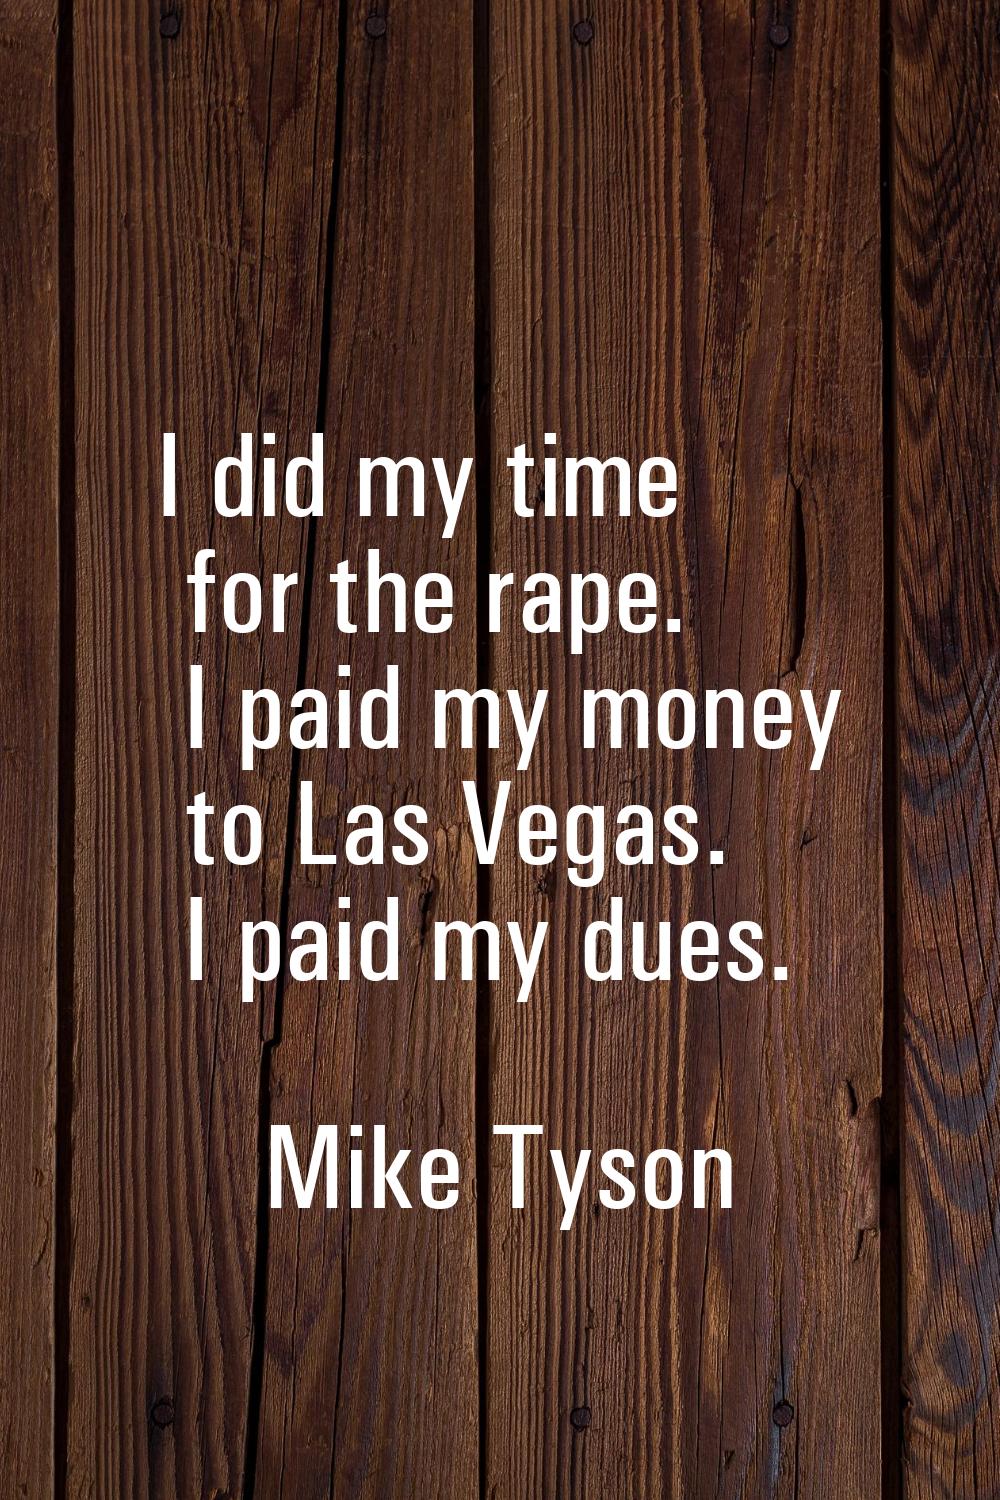 I did my time for the rape. I paid my money to Las Vegas. I paid my dues.